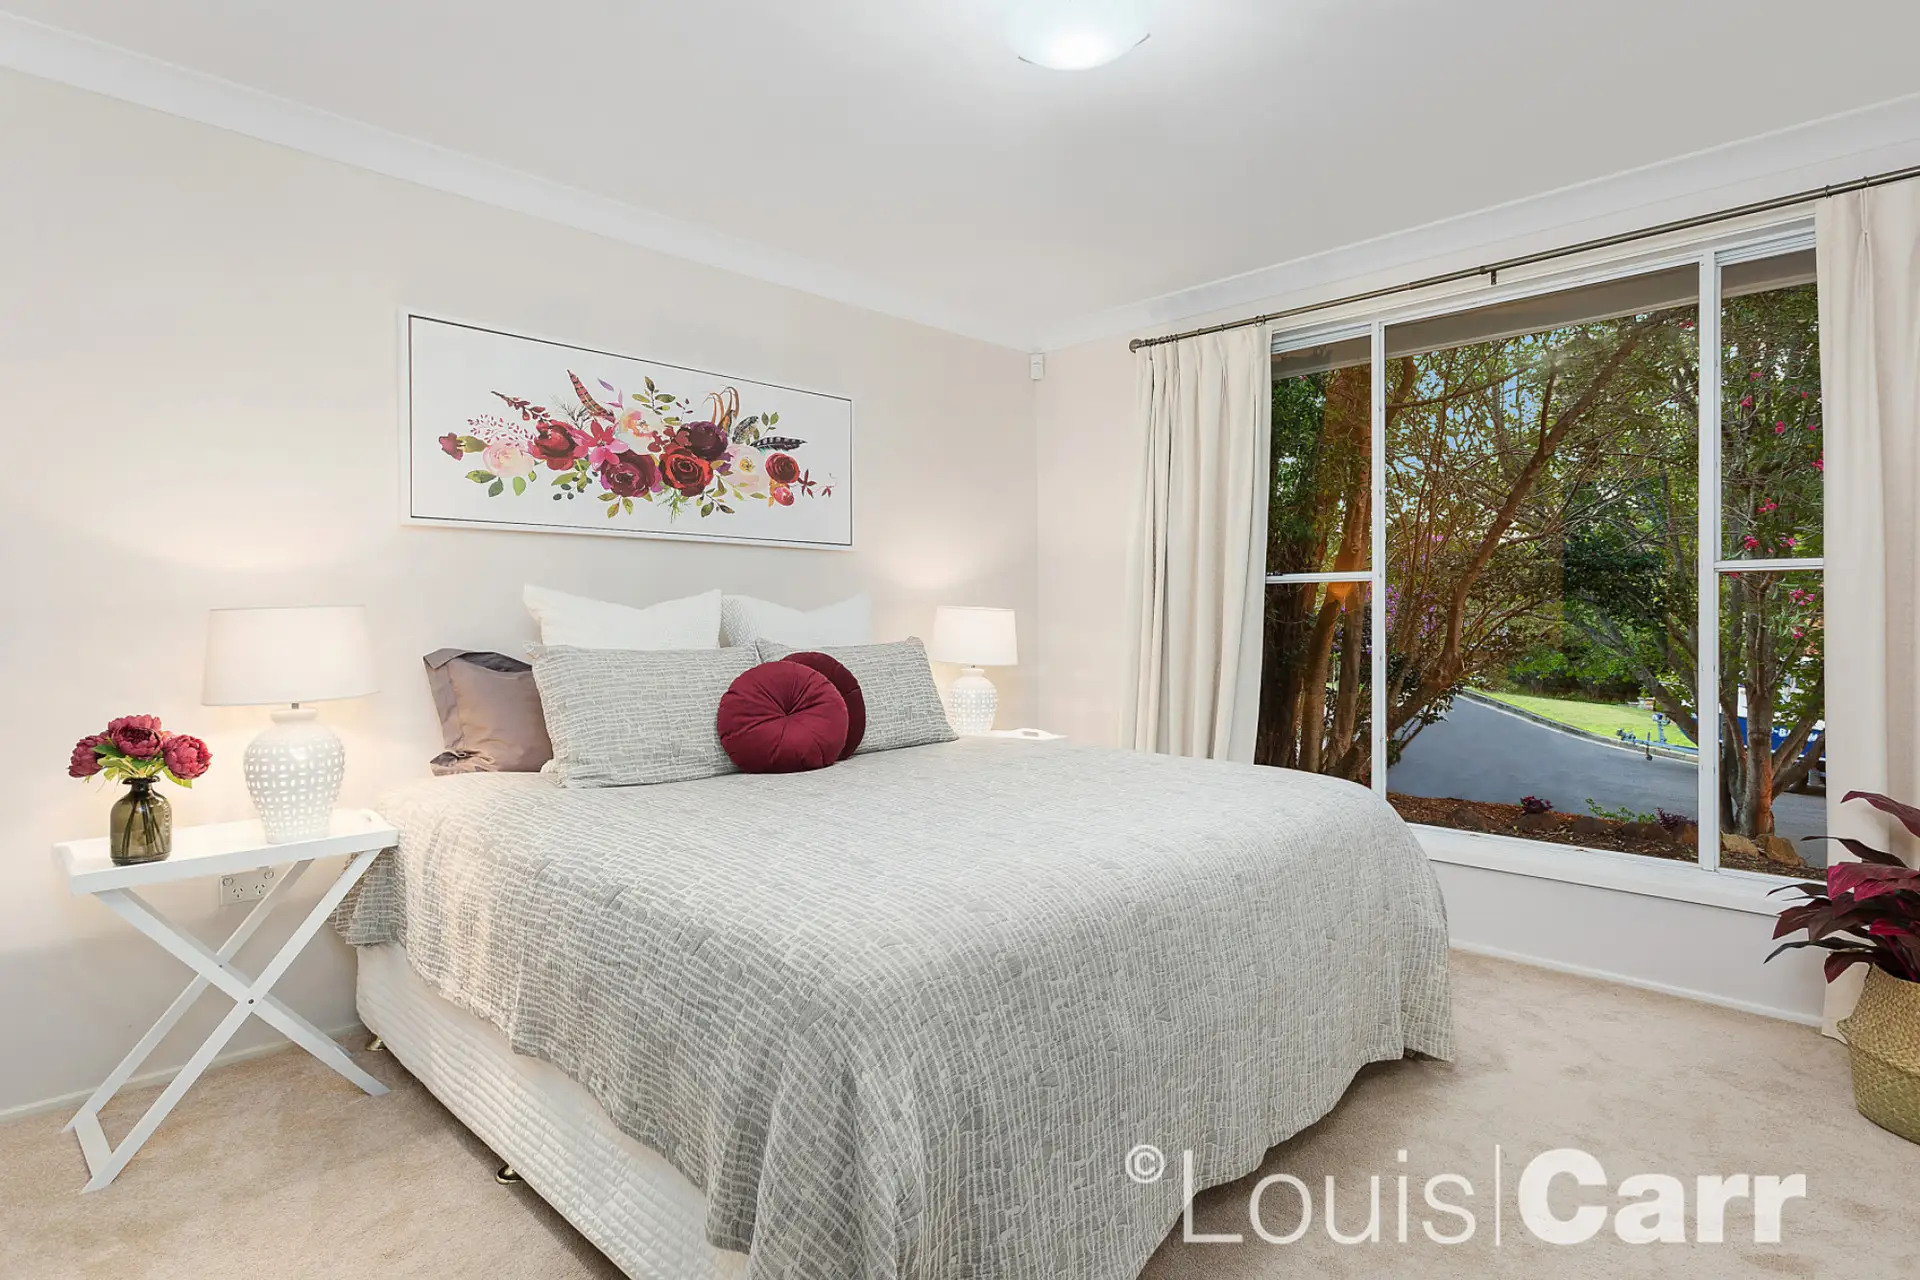 Photo #7: 6 Crackenback Court, Glenhaven - Sold by Louis Carr Real Estate